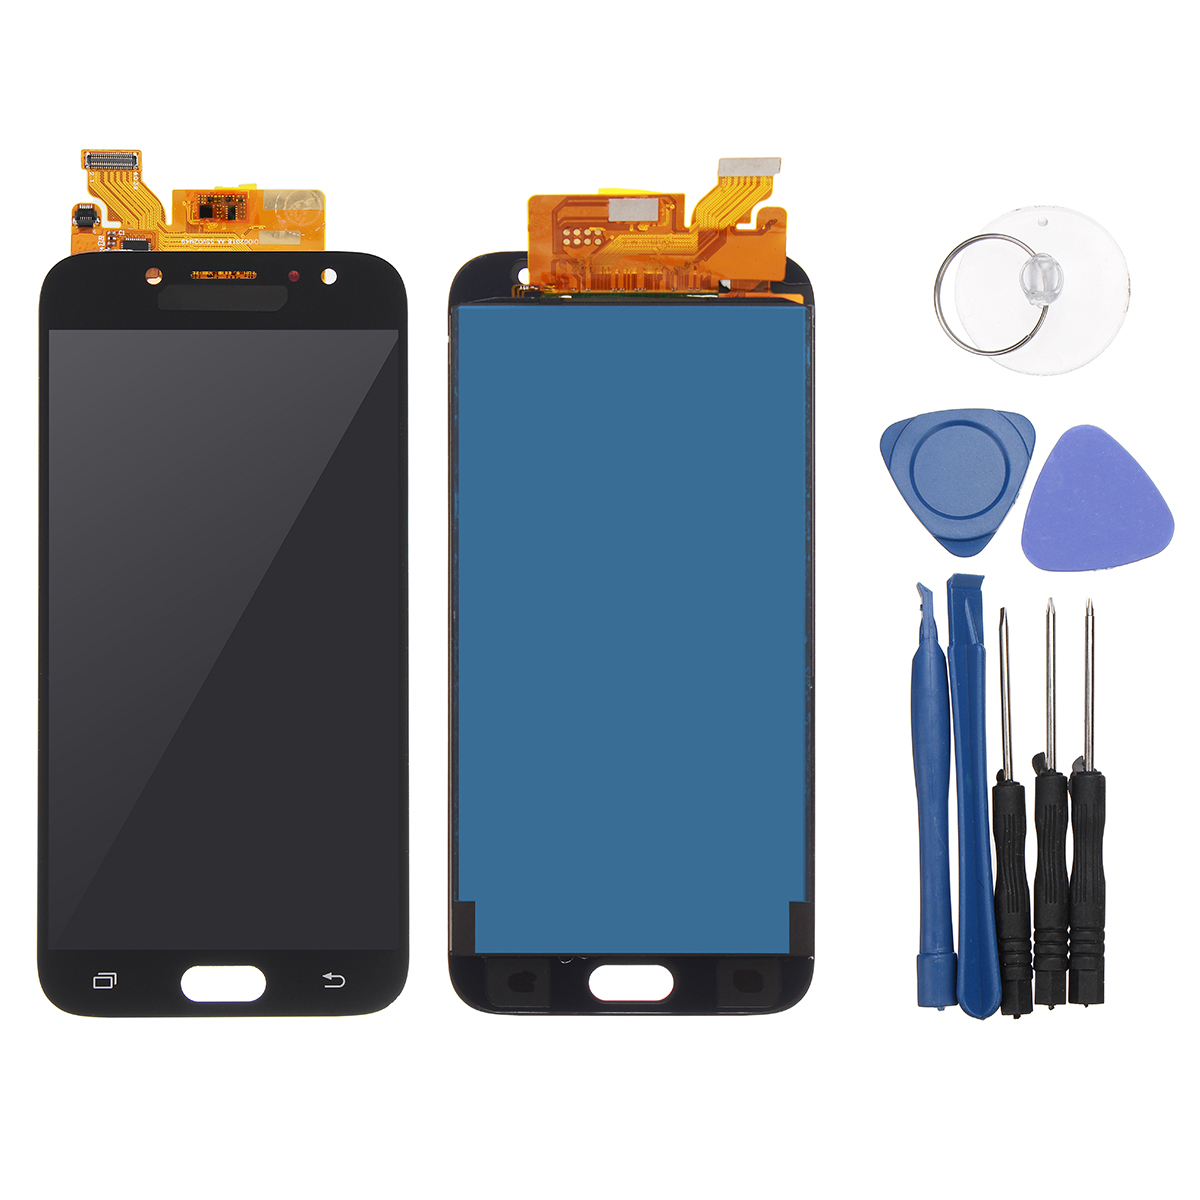 

LCD Display + Touch Screen Digitizer Replacement With Repair Tools For Samsung Galaxy J7 Pro 2017 J730G J730 J730F/DS/M